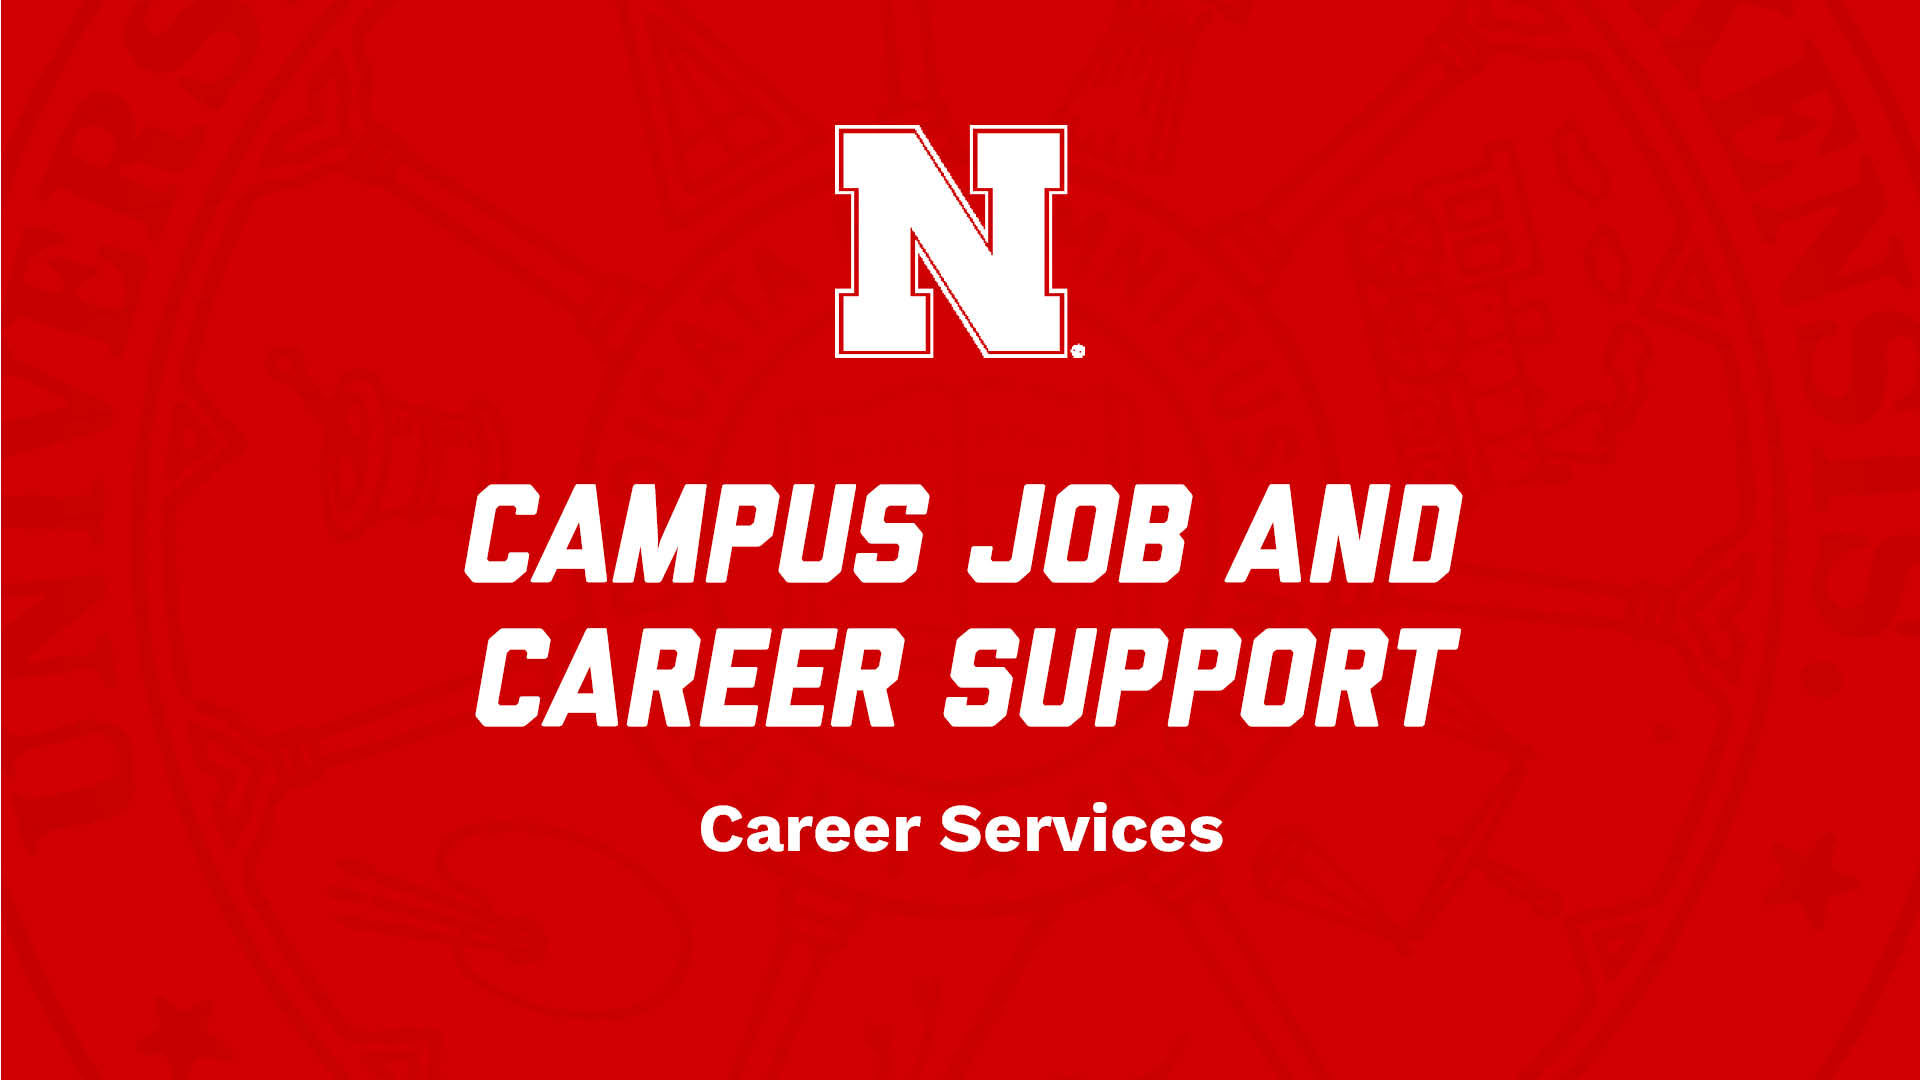 Campus Jobs and Career Support at UNL NSE Presentation